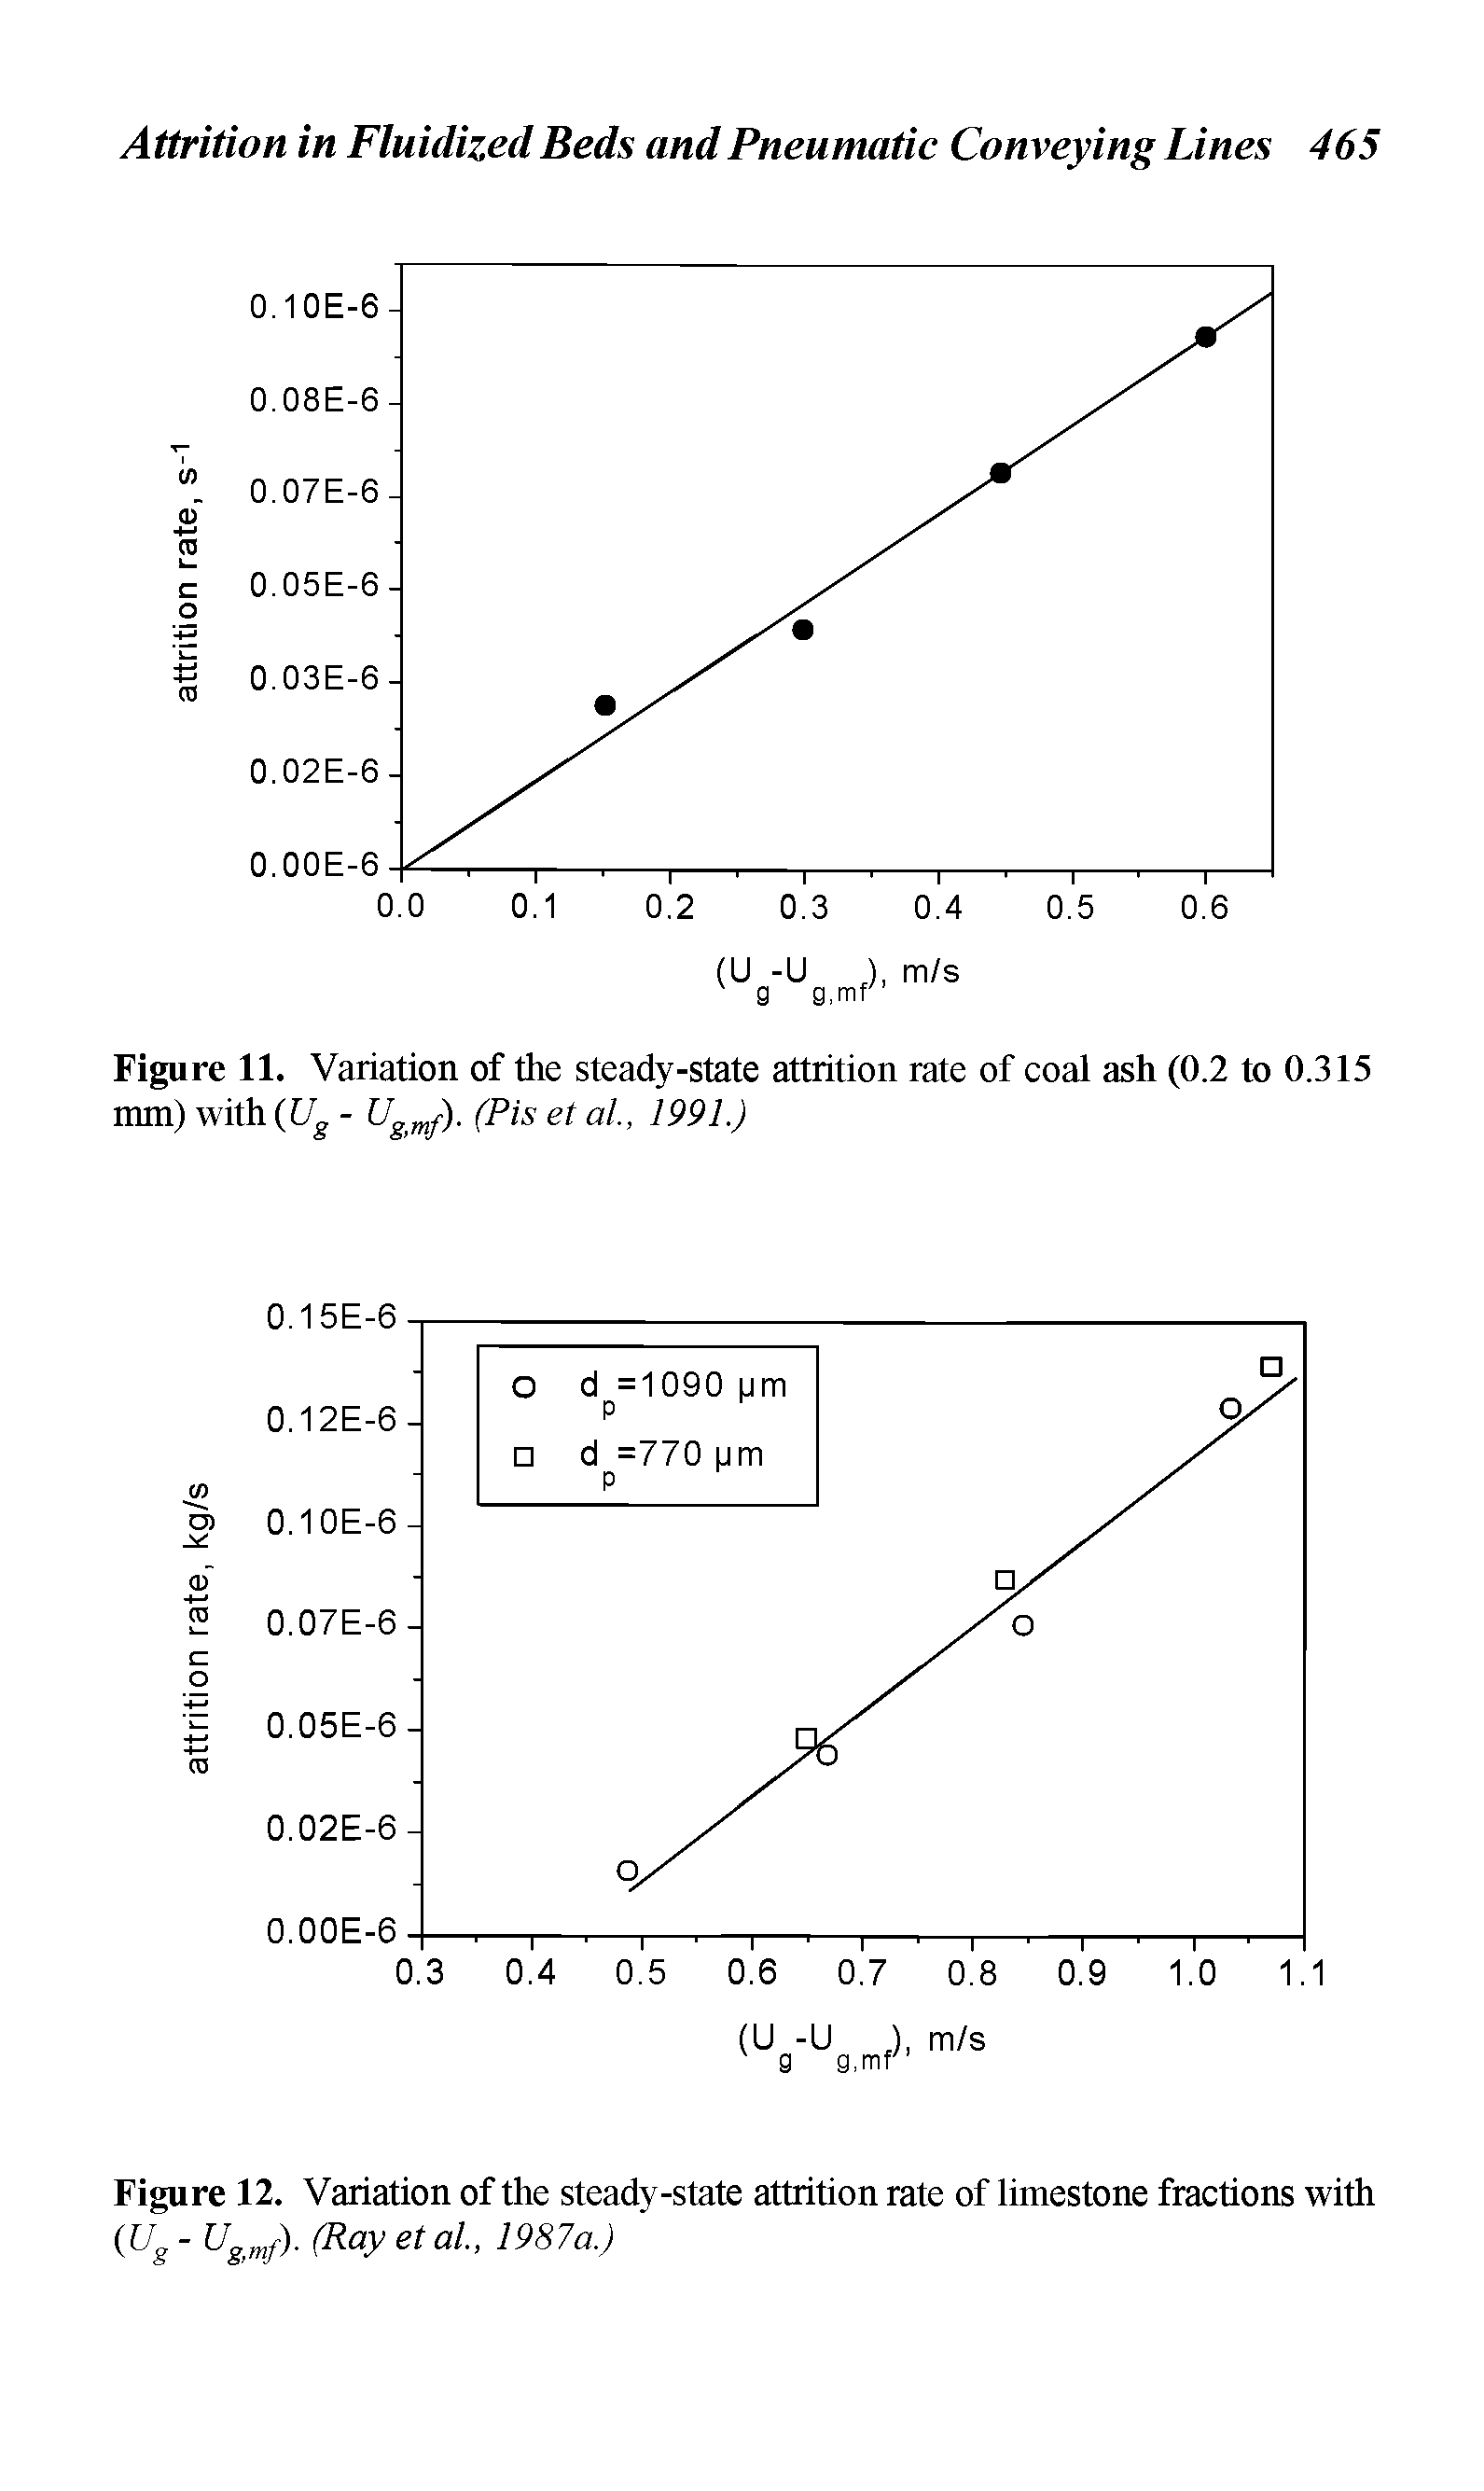 Figure 11. Variation of the steady-state attrition rate of coal ash (0.2 to 0.315 mm) with (Ug - Ugmj). (Pis et al., 1991.)...